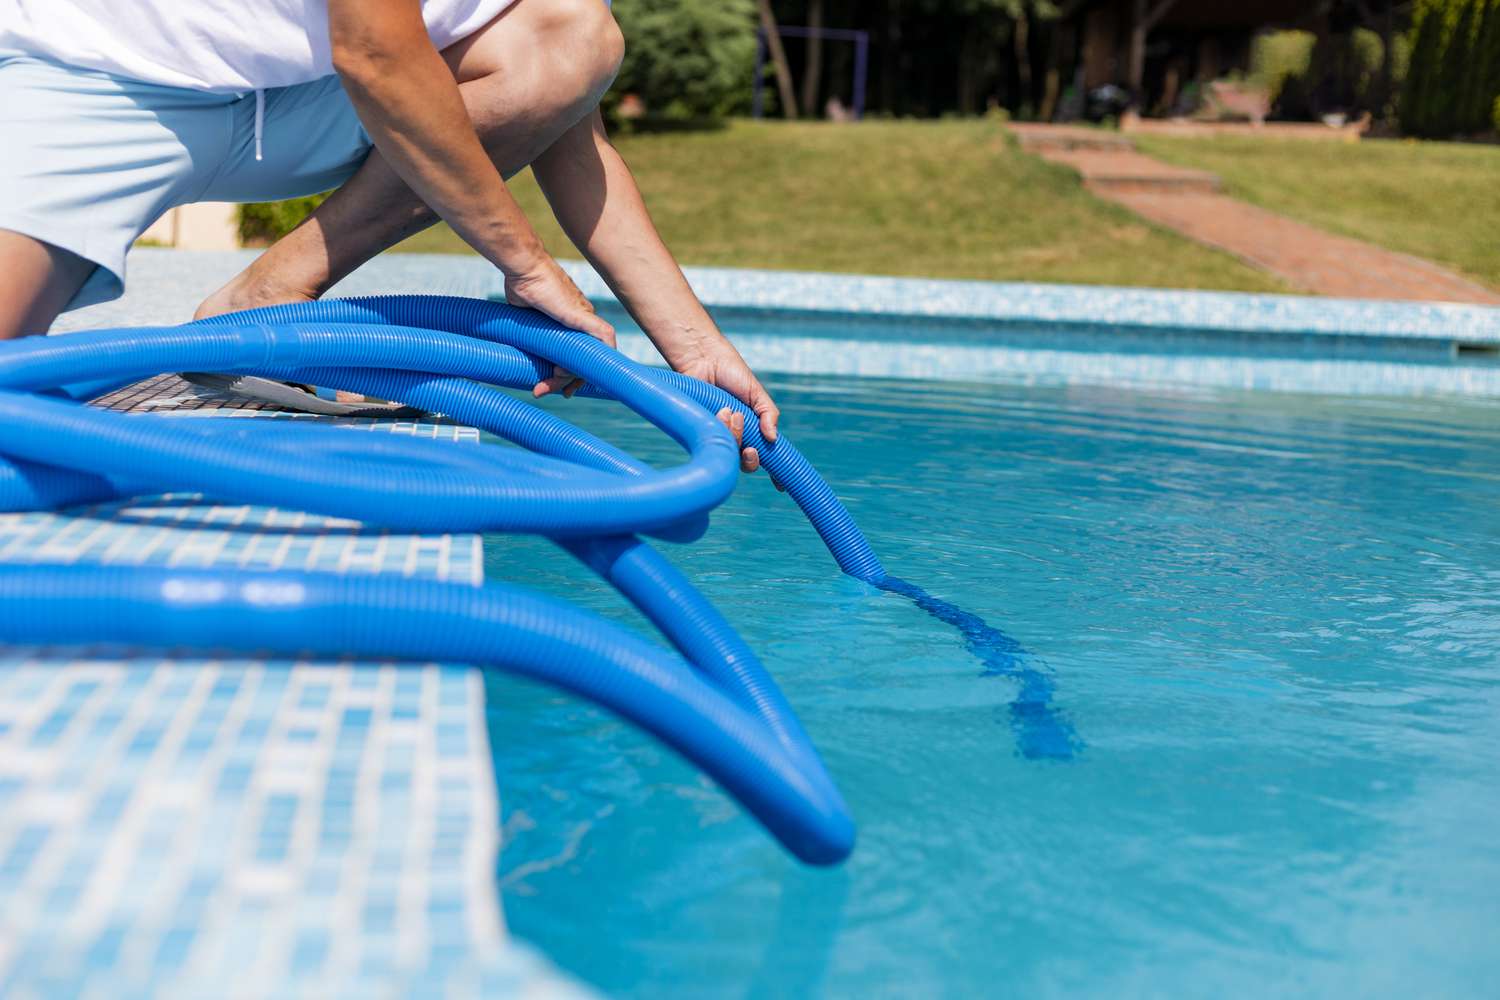 Man cleaning the pool with a handheld vacuum